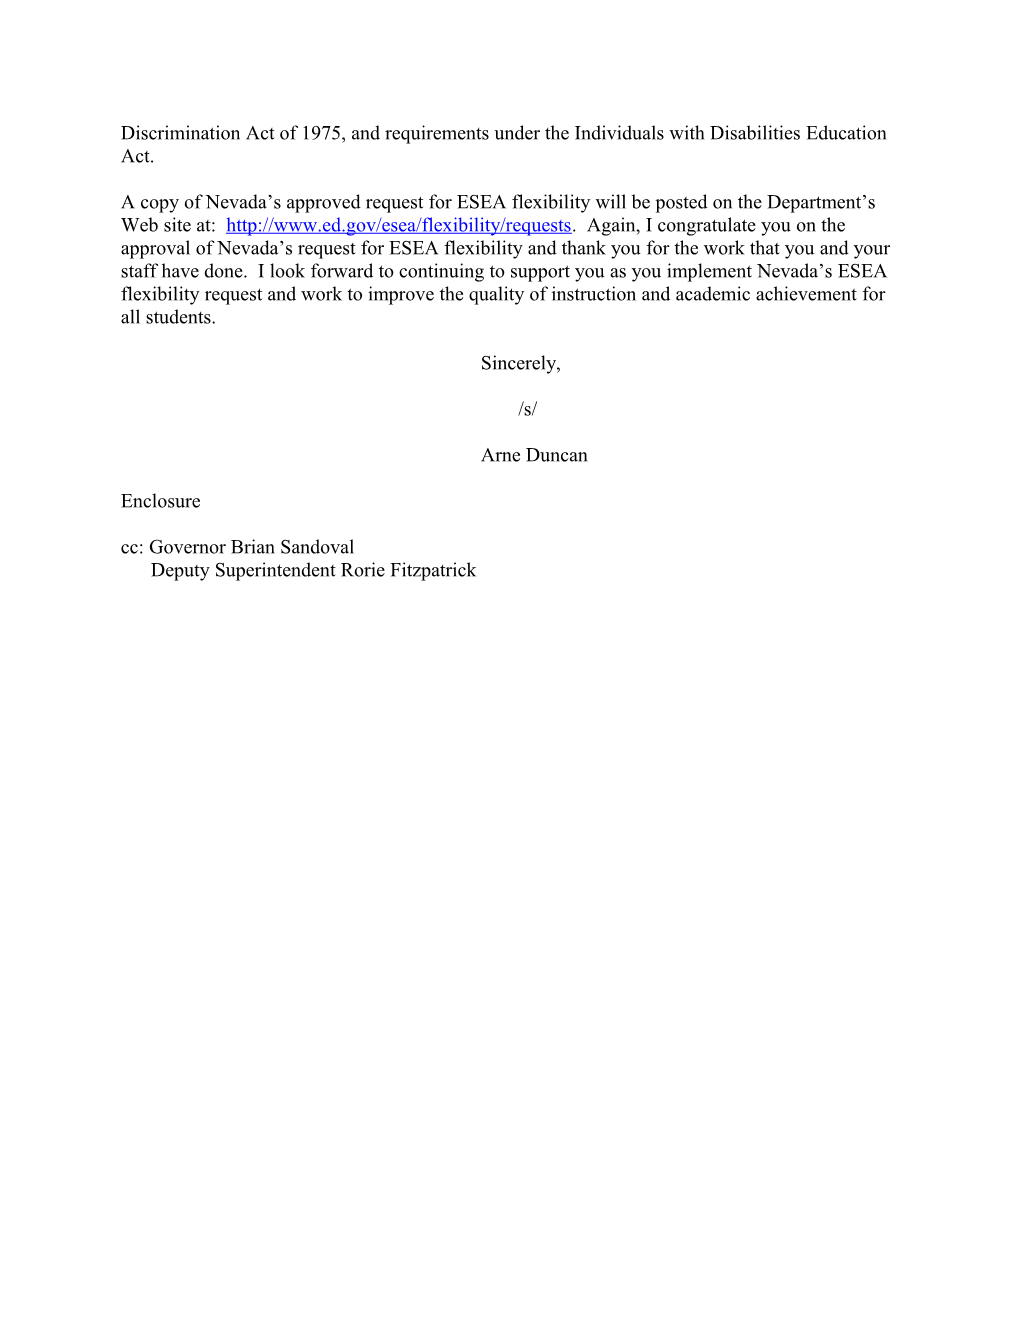 Nevada: Secretary's Approval Letter of ESEA Flexibility Request August 8, 2012 (MS Word)